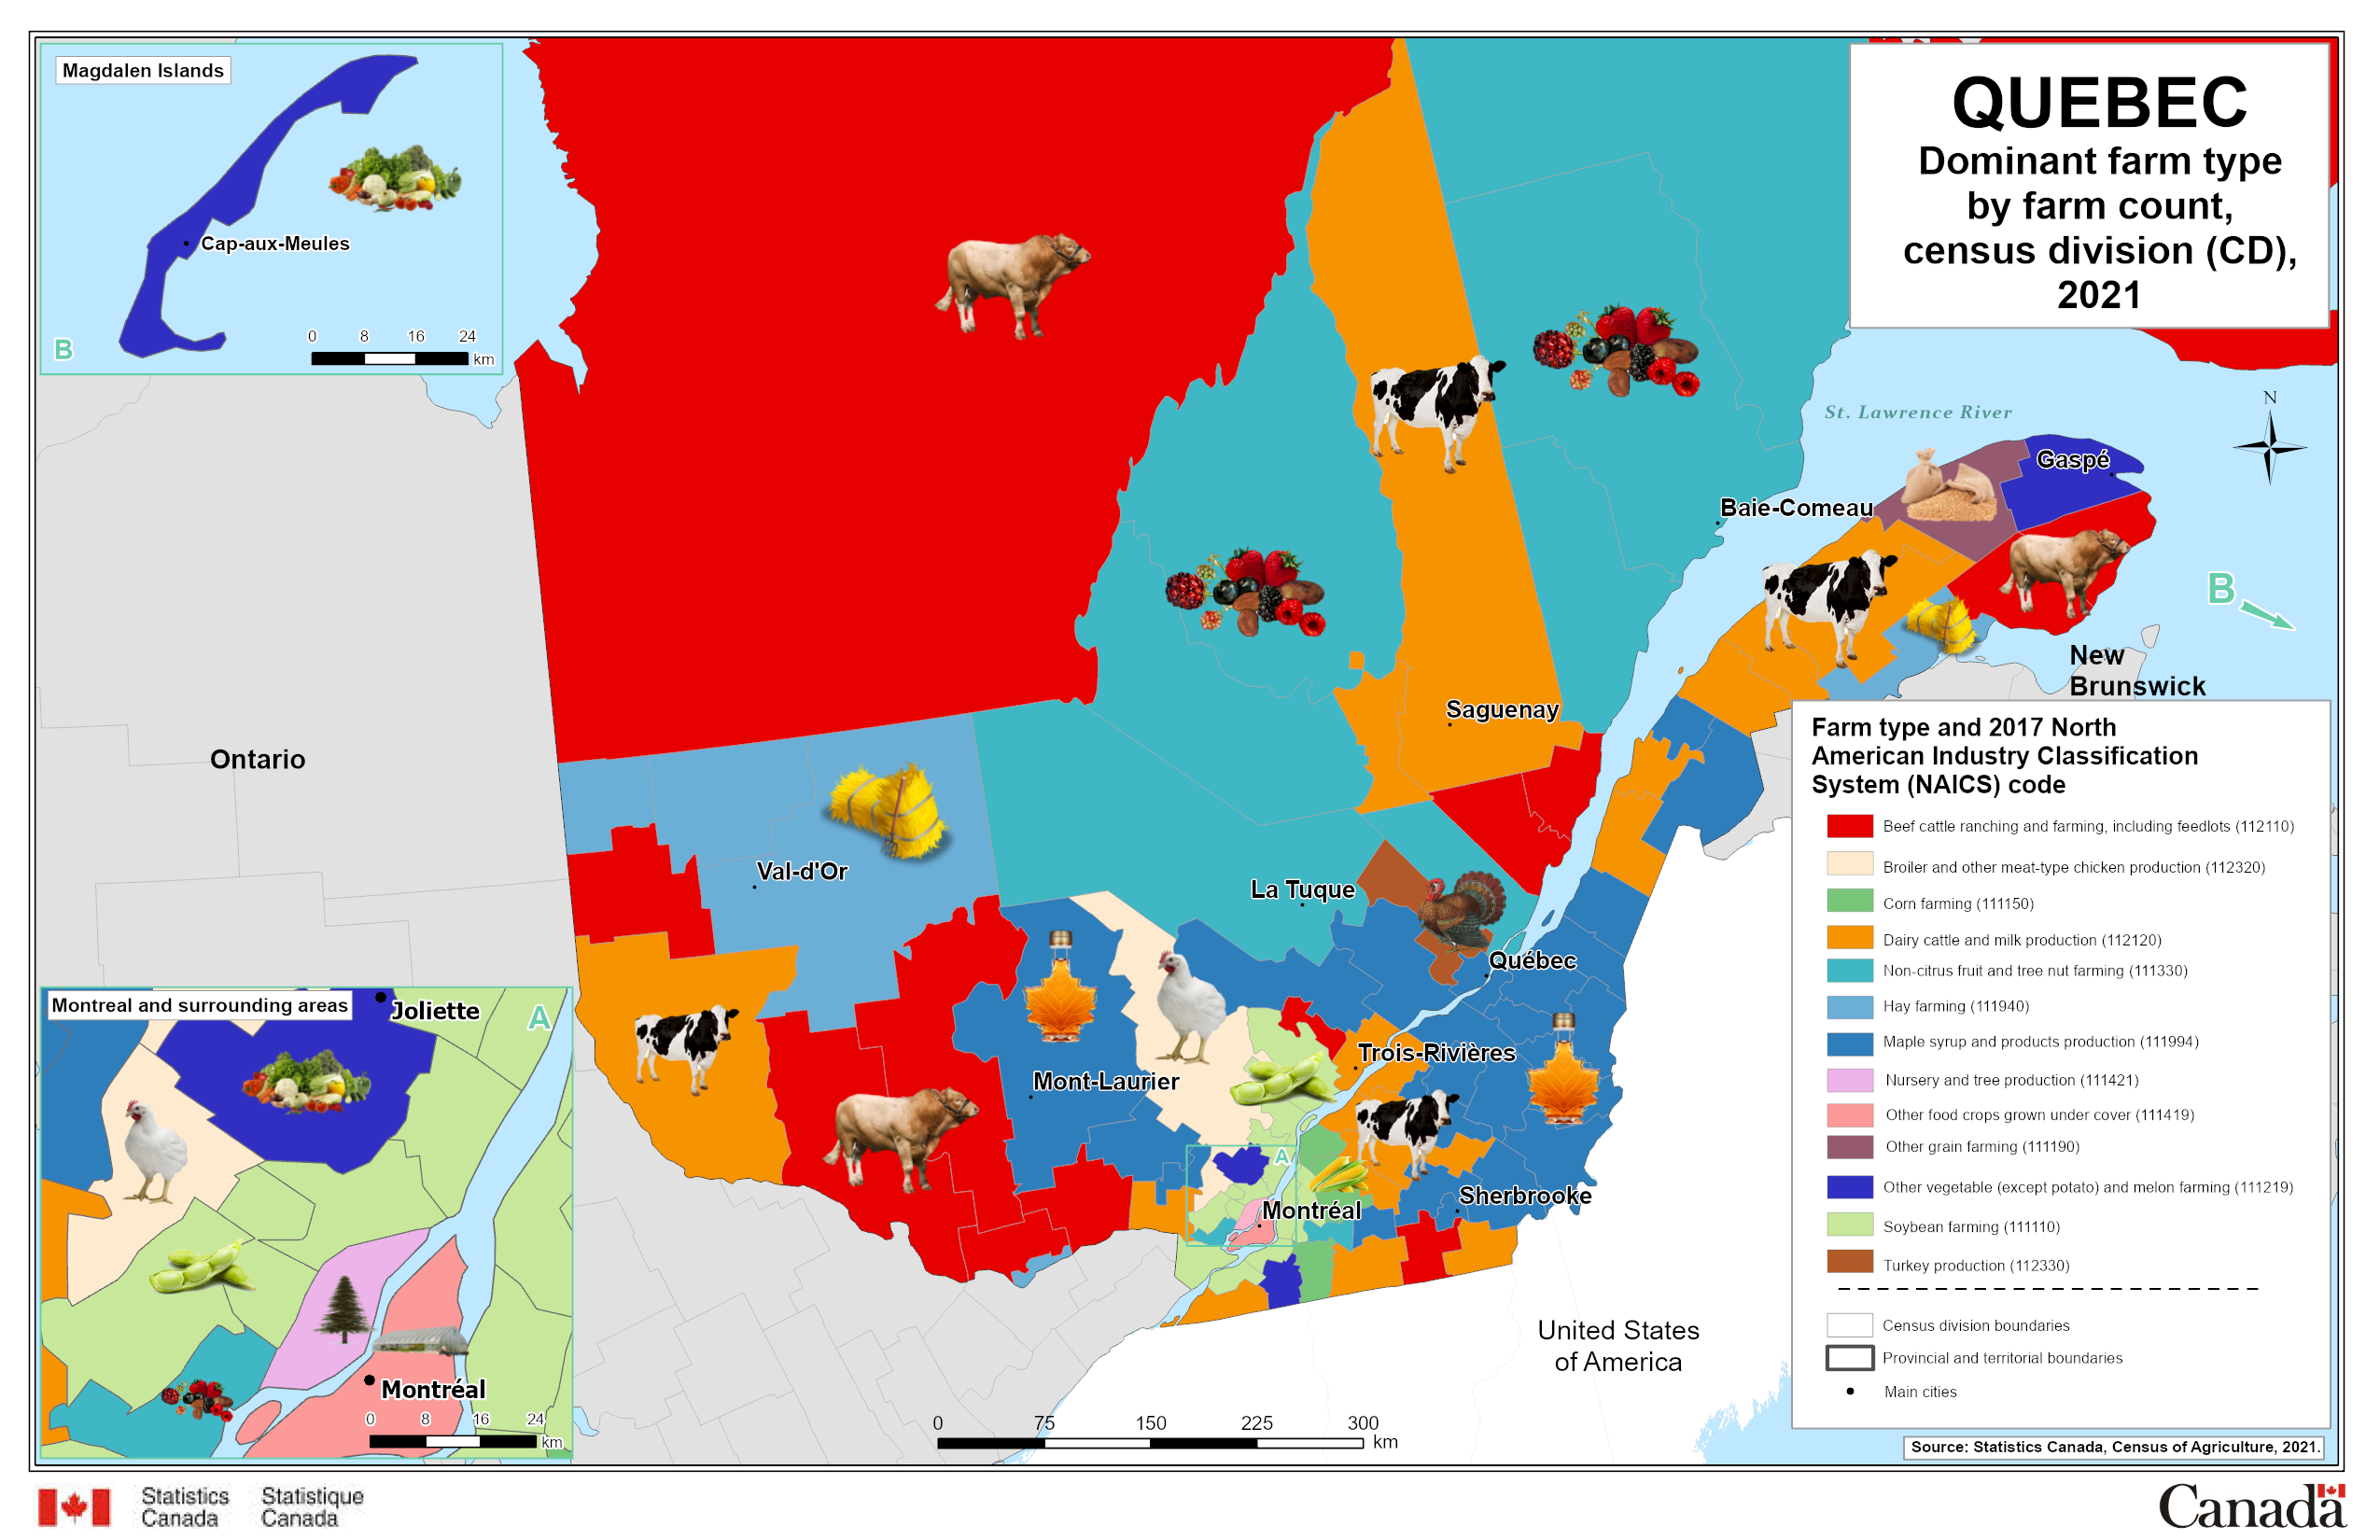 Quebec - Dominant farm type by farm count, census division (CD), 2021